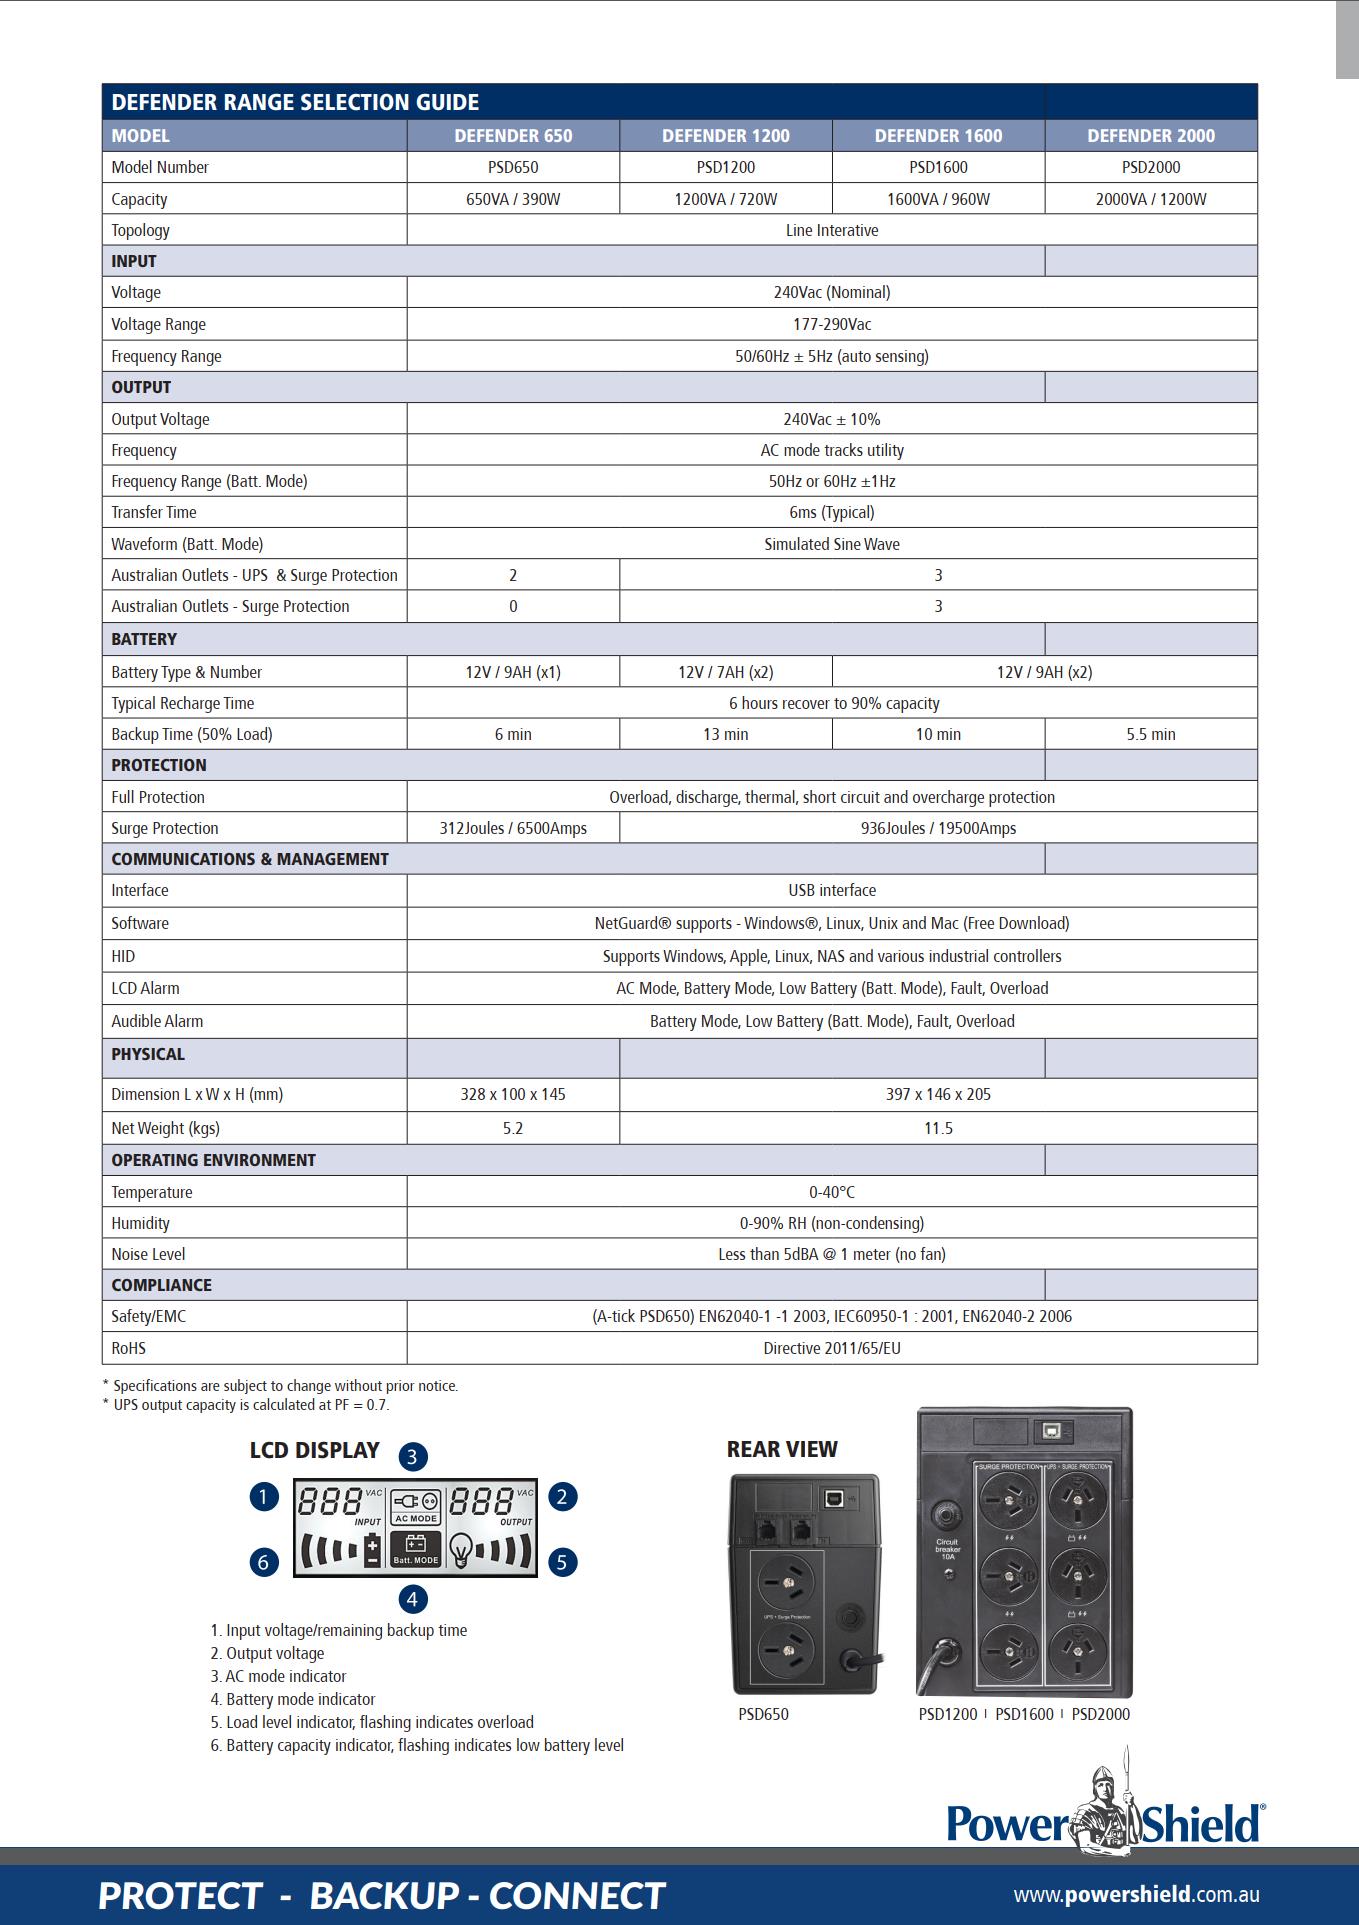 A large marketing image providing additional information about the product PowerShield Defender LCD 1.6KVA UPS - Additional alt info not provided